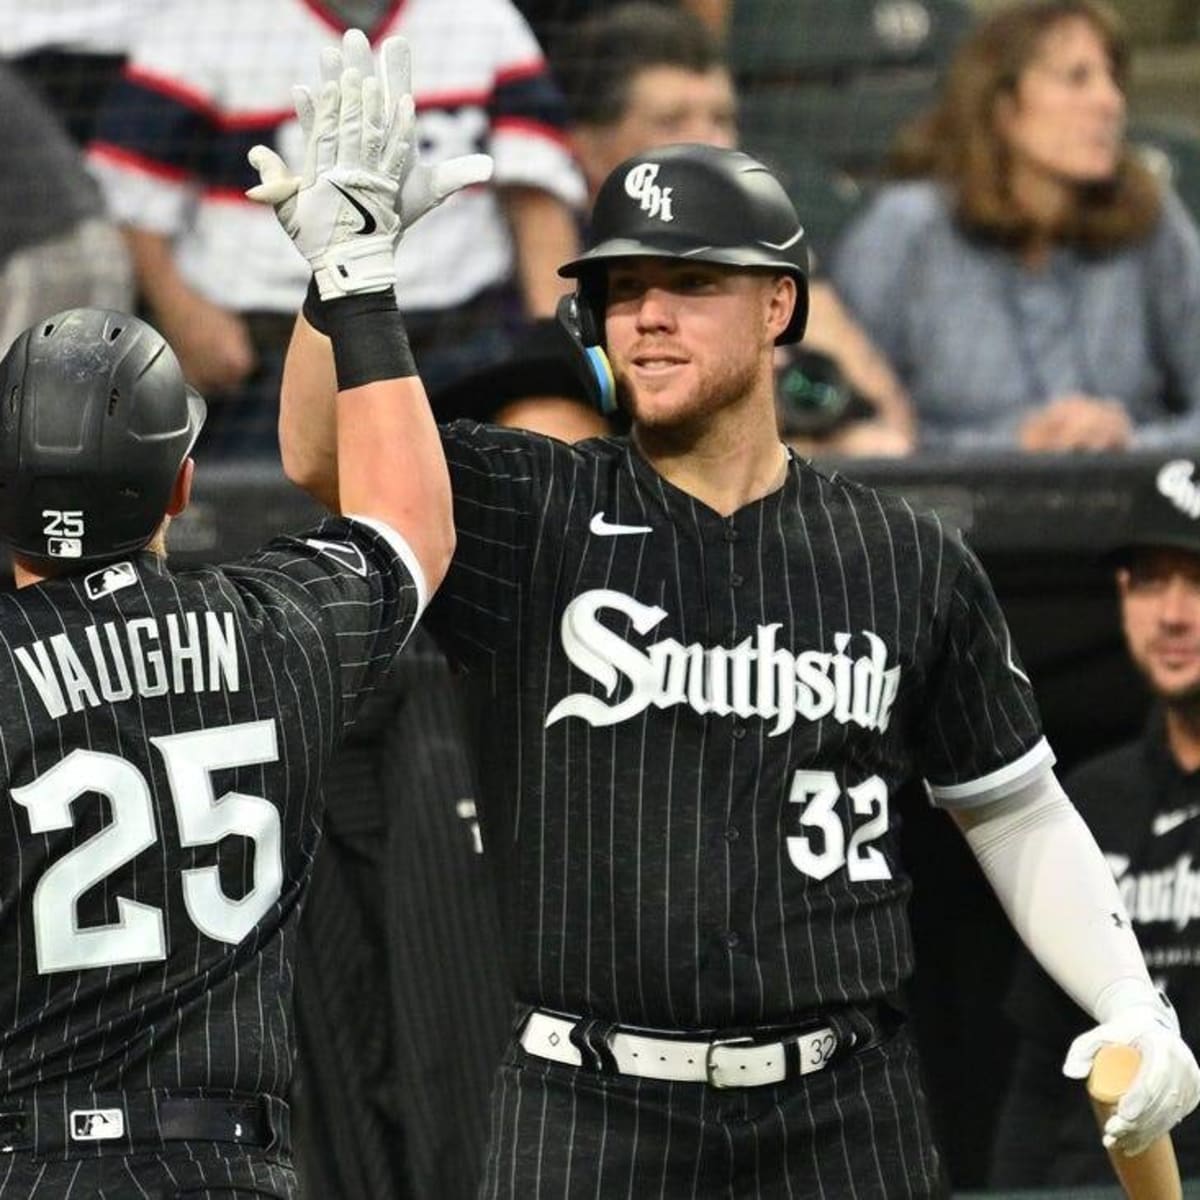 White Sox defeat struggling Yankees for 3rd straight win